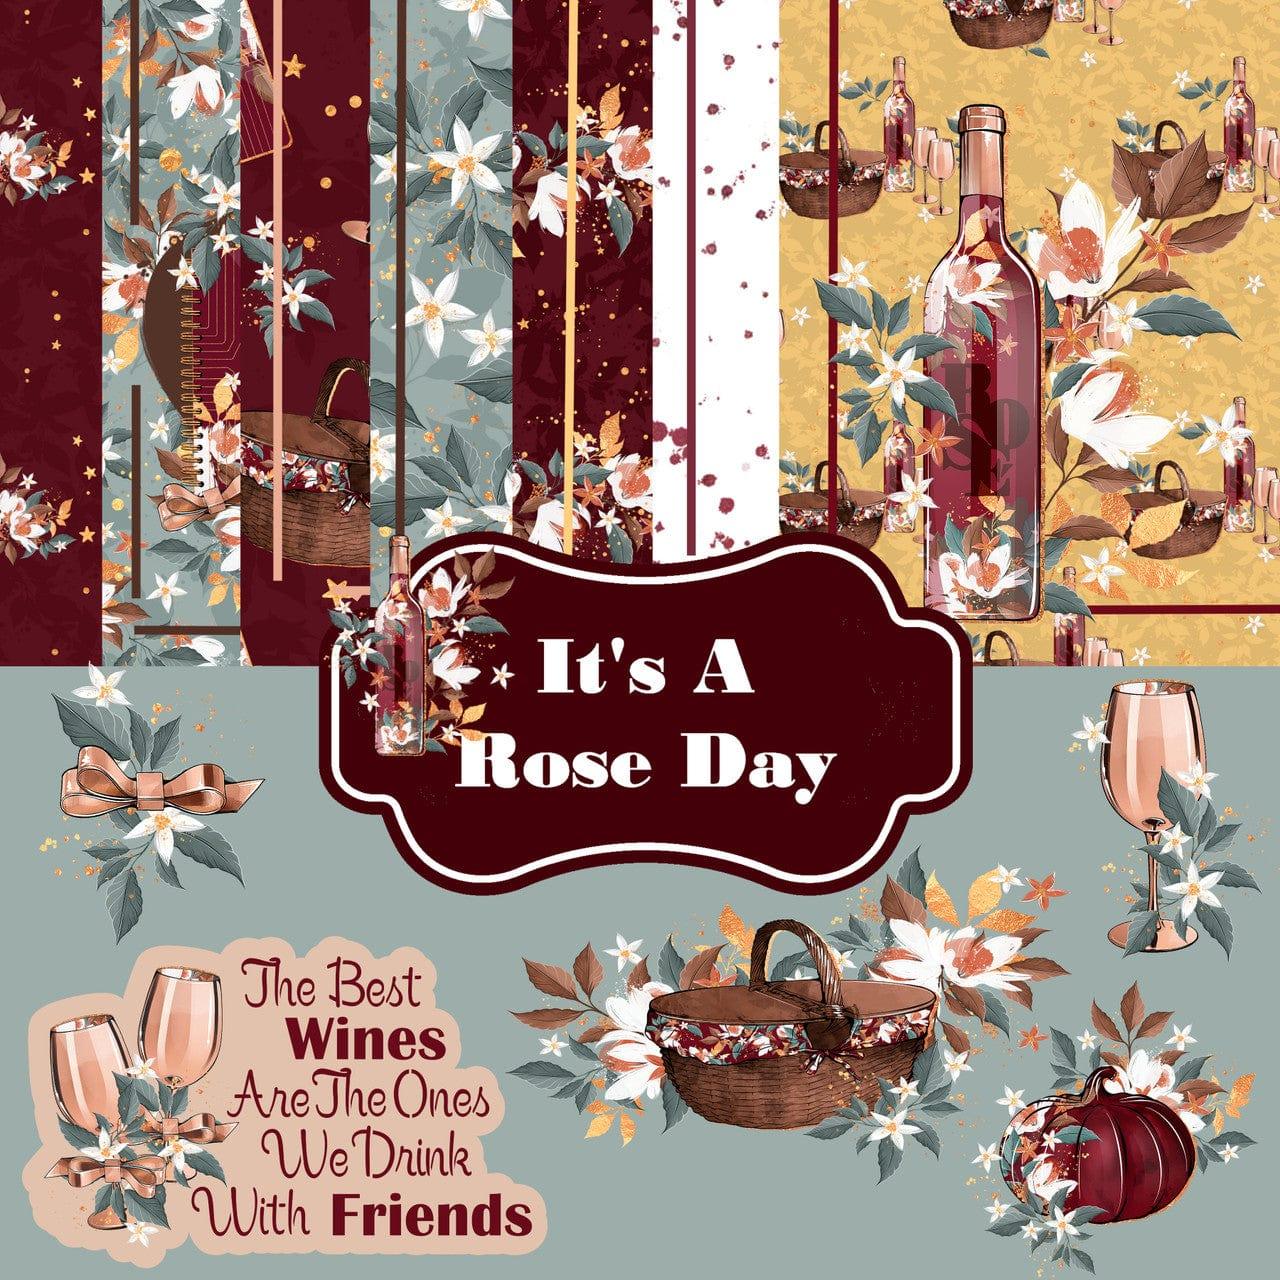 It's A Rose Day 12 x 12 Scrapbook Paper & Embellishment Kit by SSC Designs